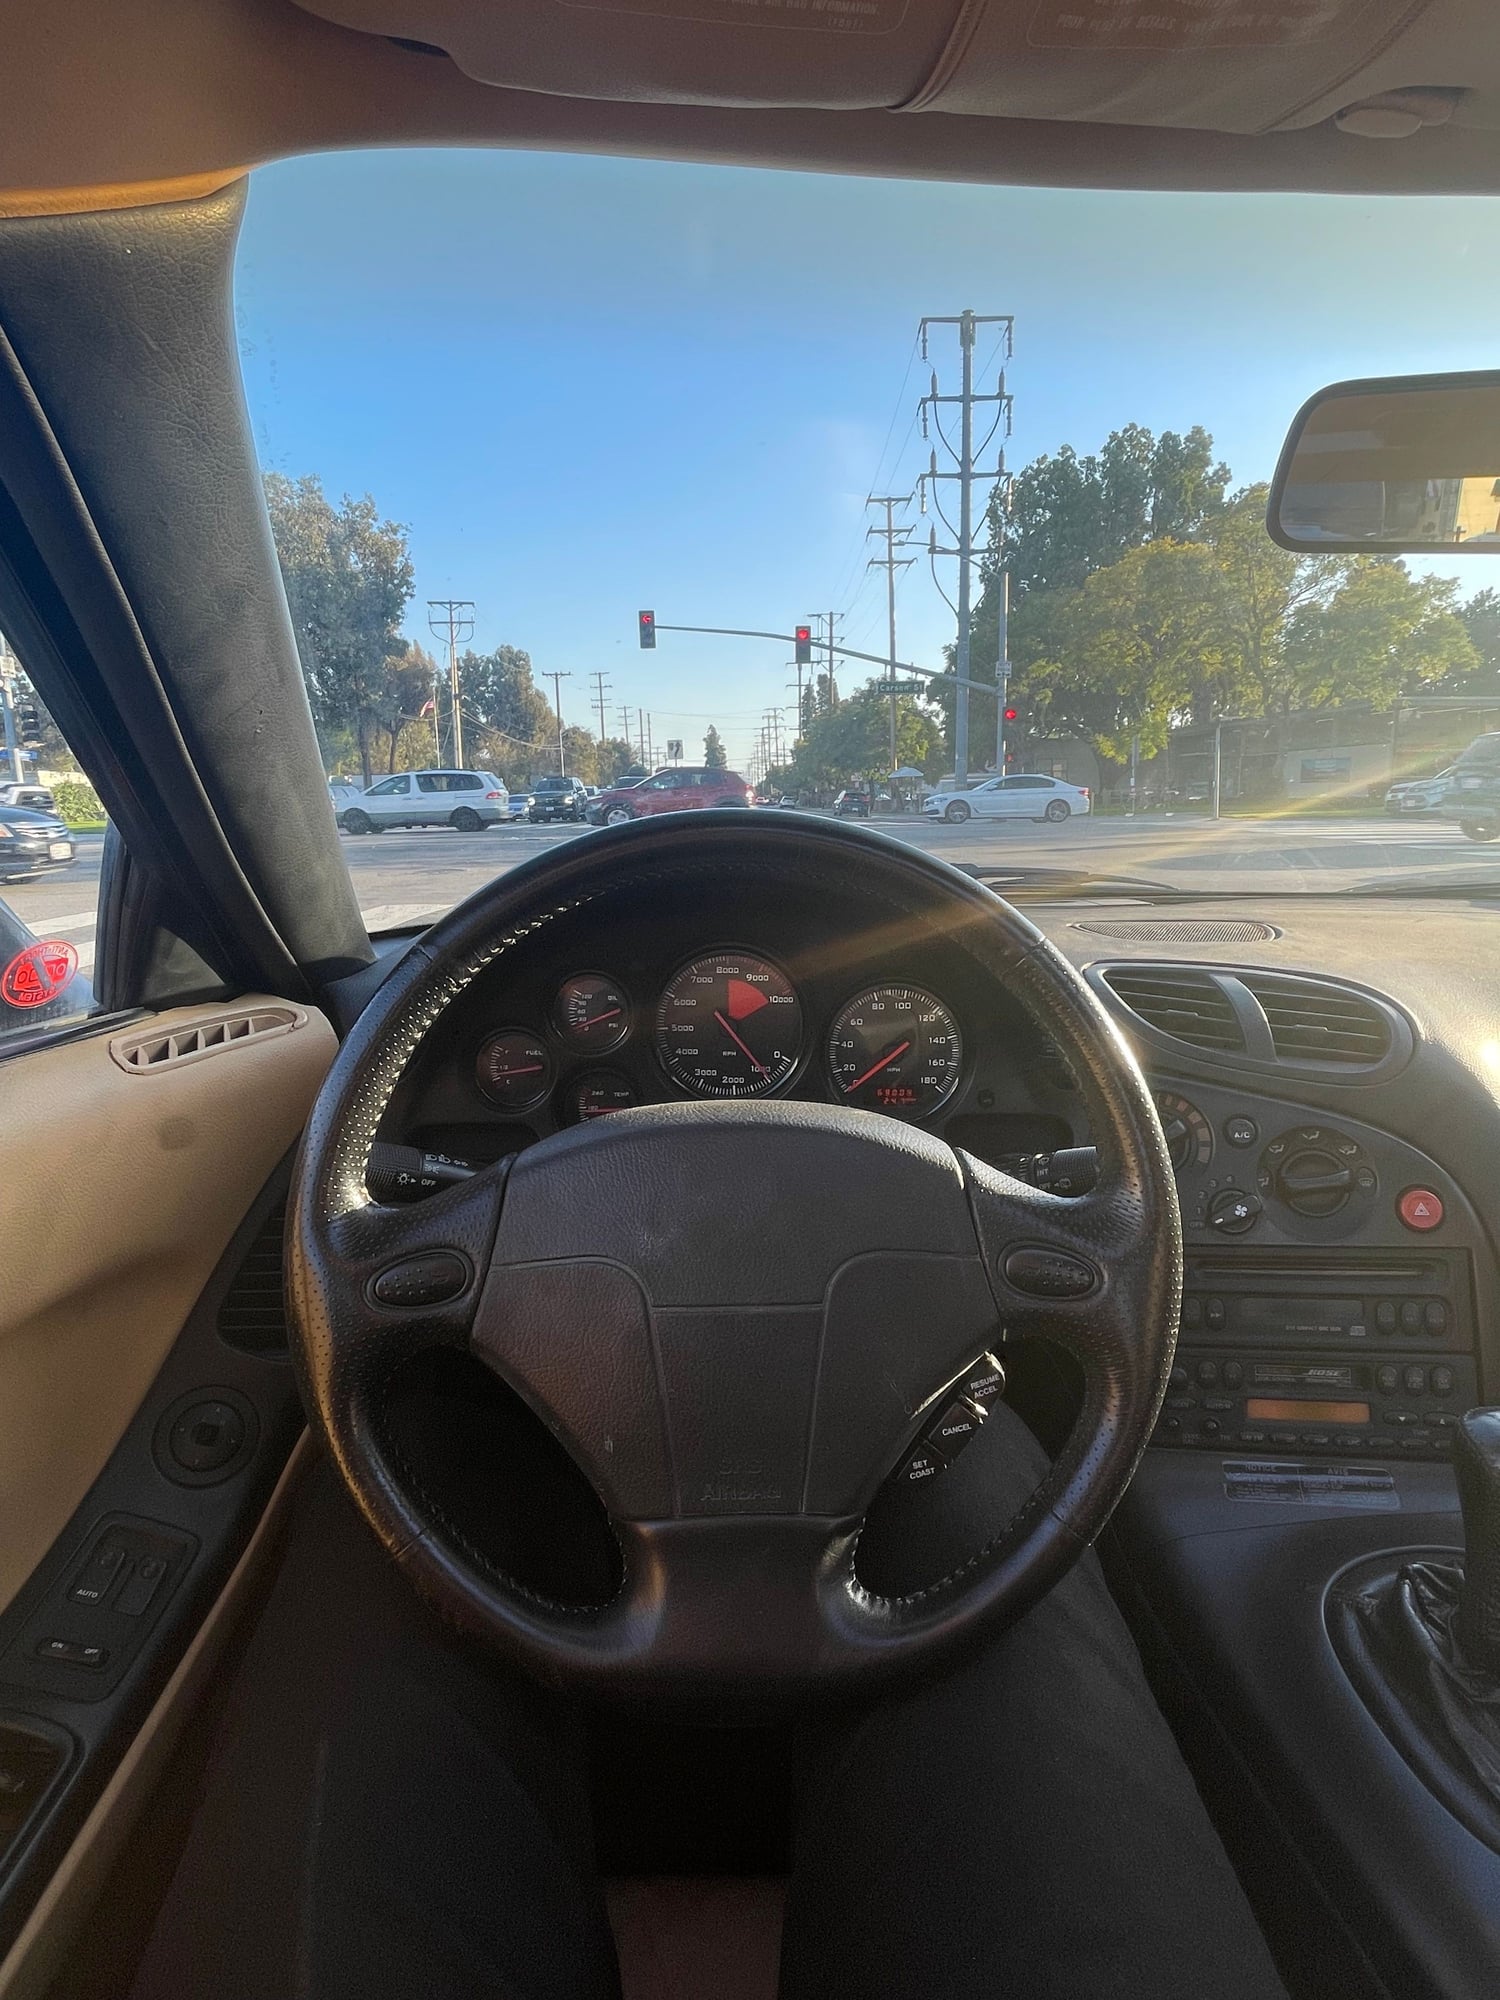 1993 Mazda RX-7 - FS: 1993 Mazda RX-7 Touring | MB on Tan | 69k Miles | Clean Title | Good Compression - Used - Lakewood, CA 90712, United States